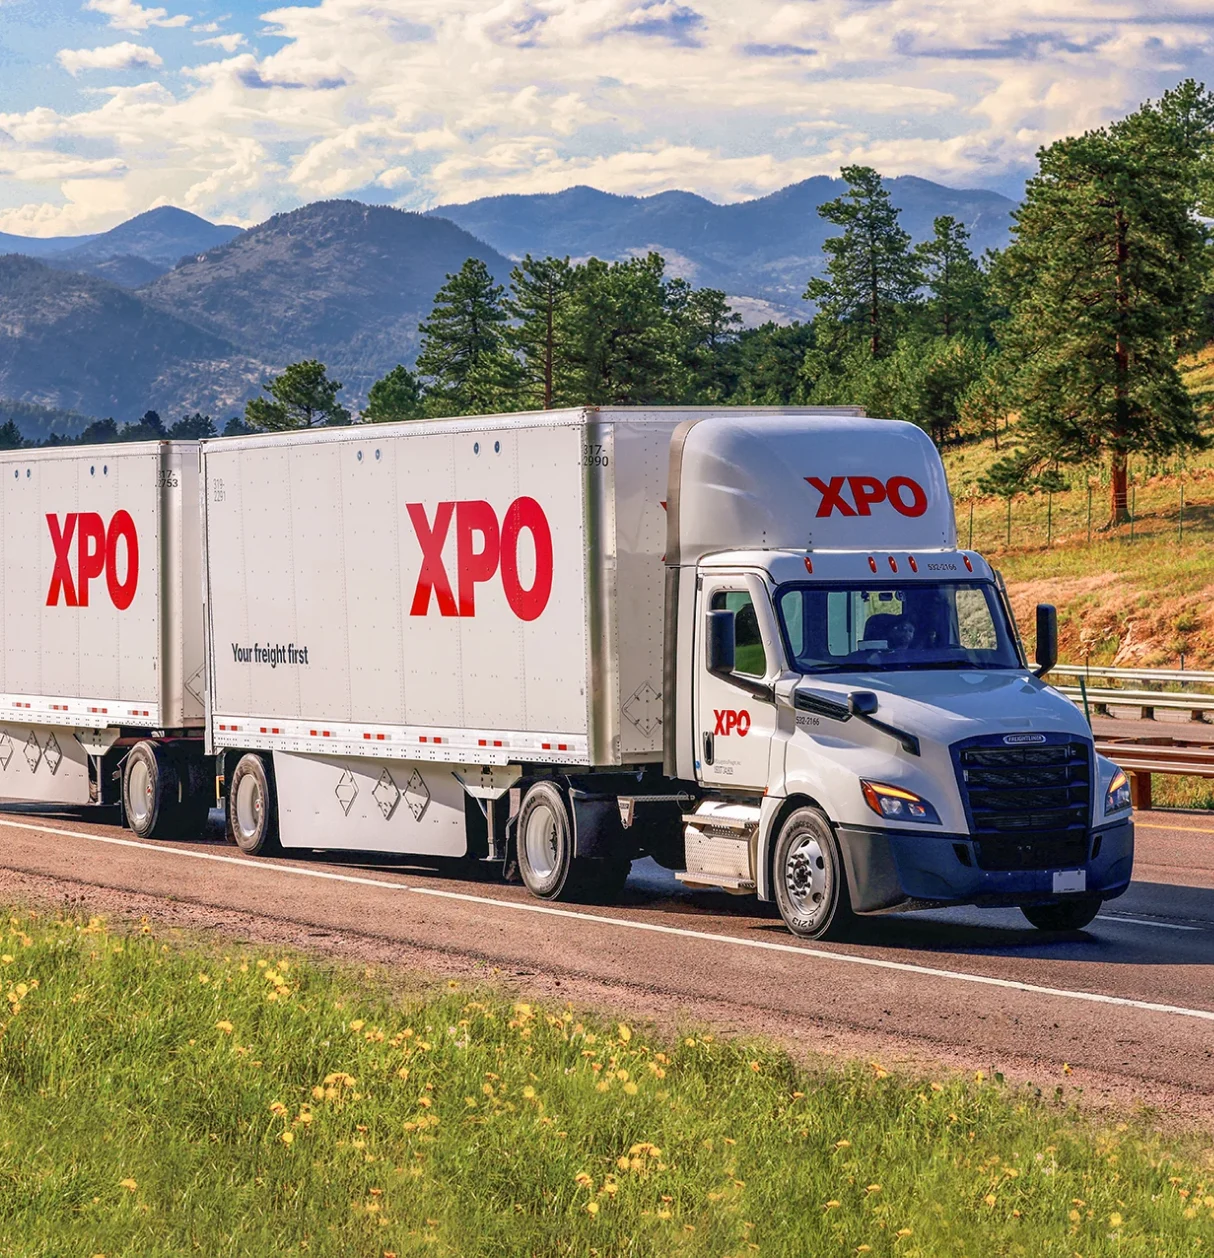 An XPO semi truck drives down a highway with mountains and pine trees in the background.